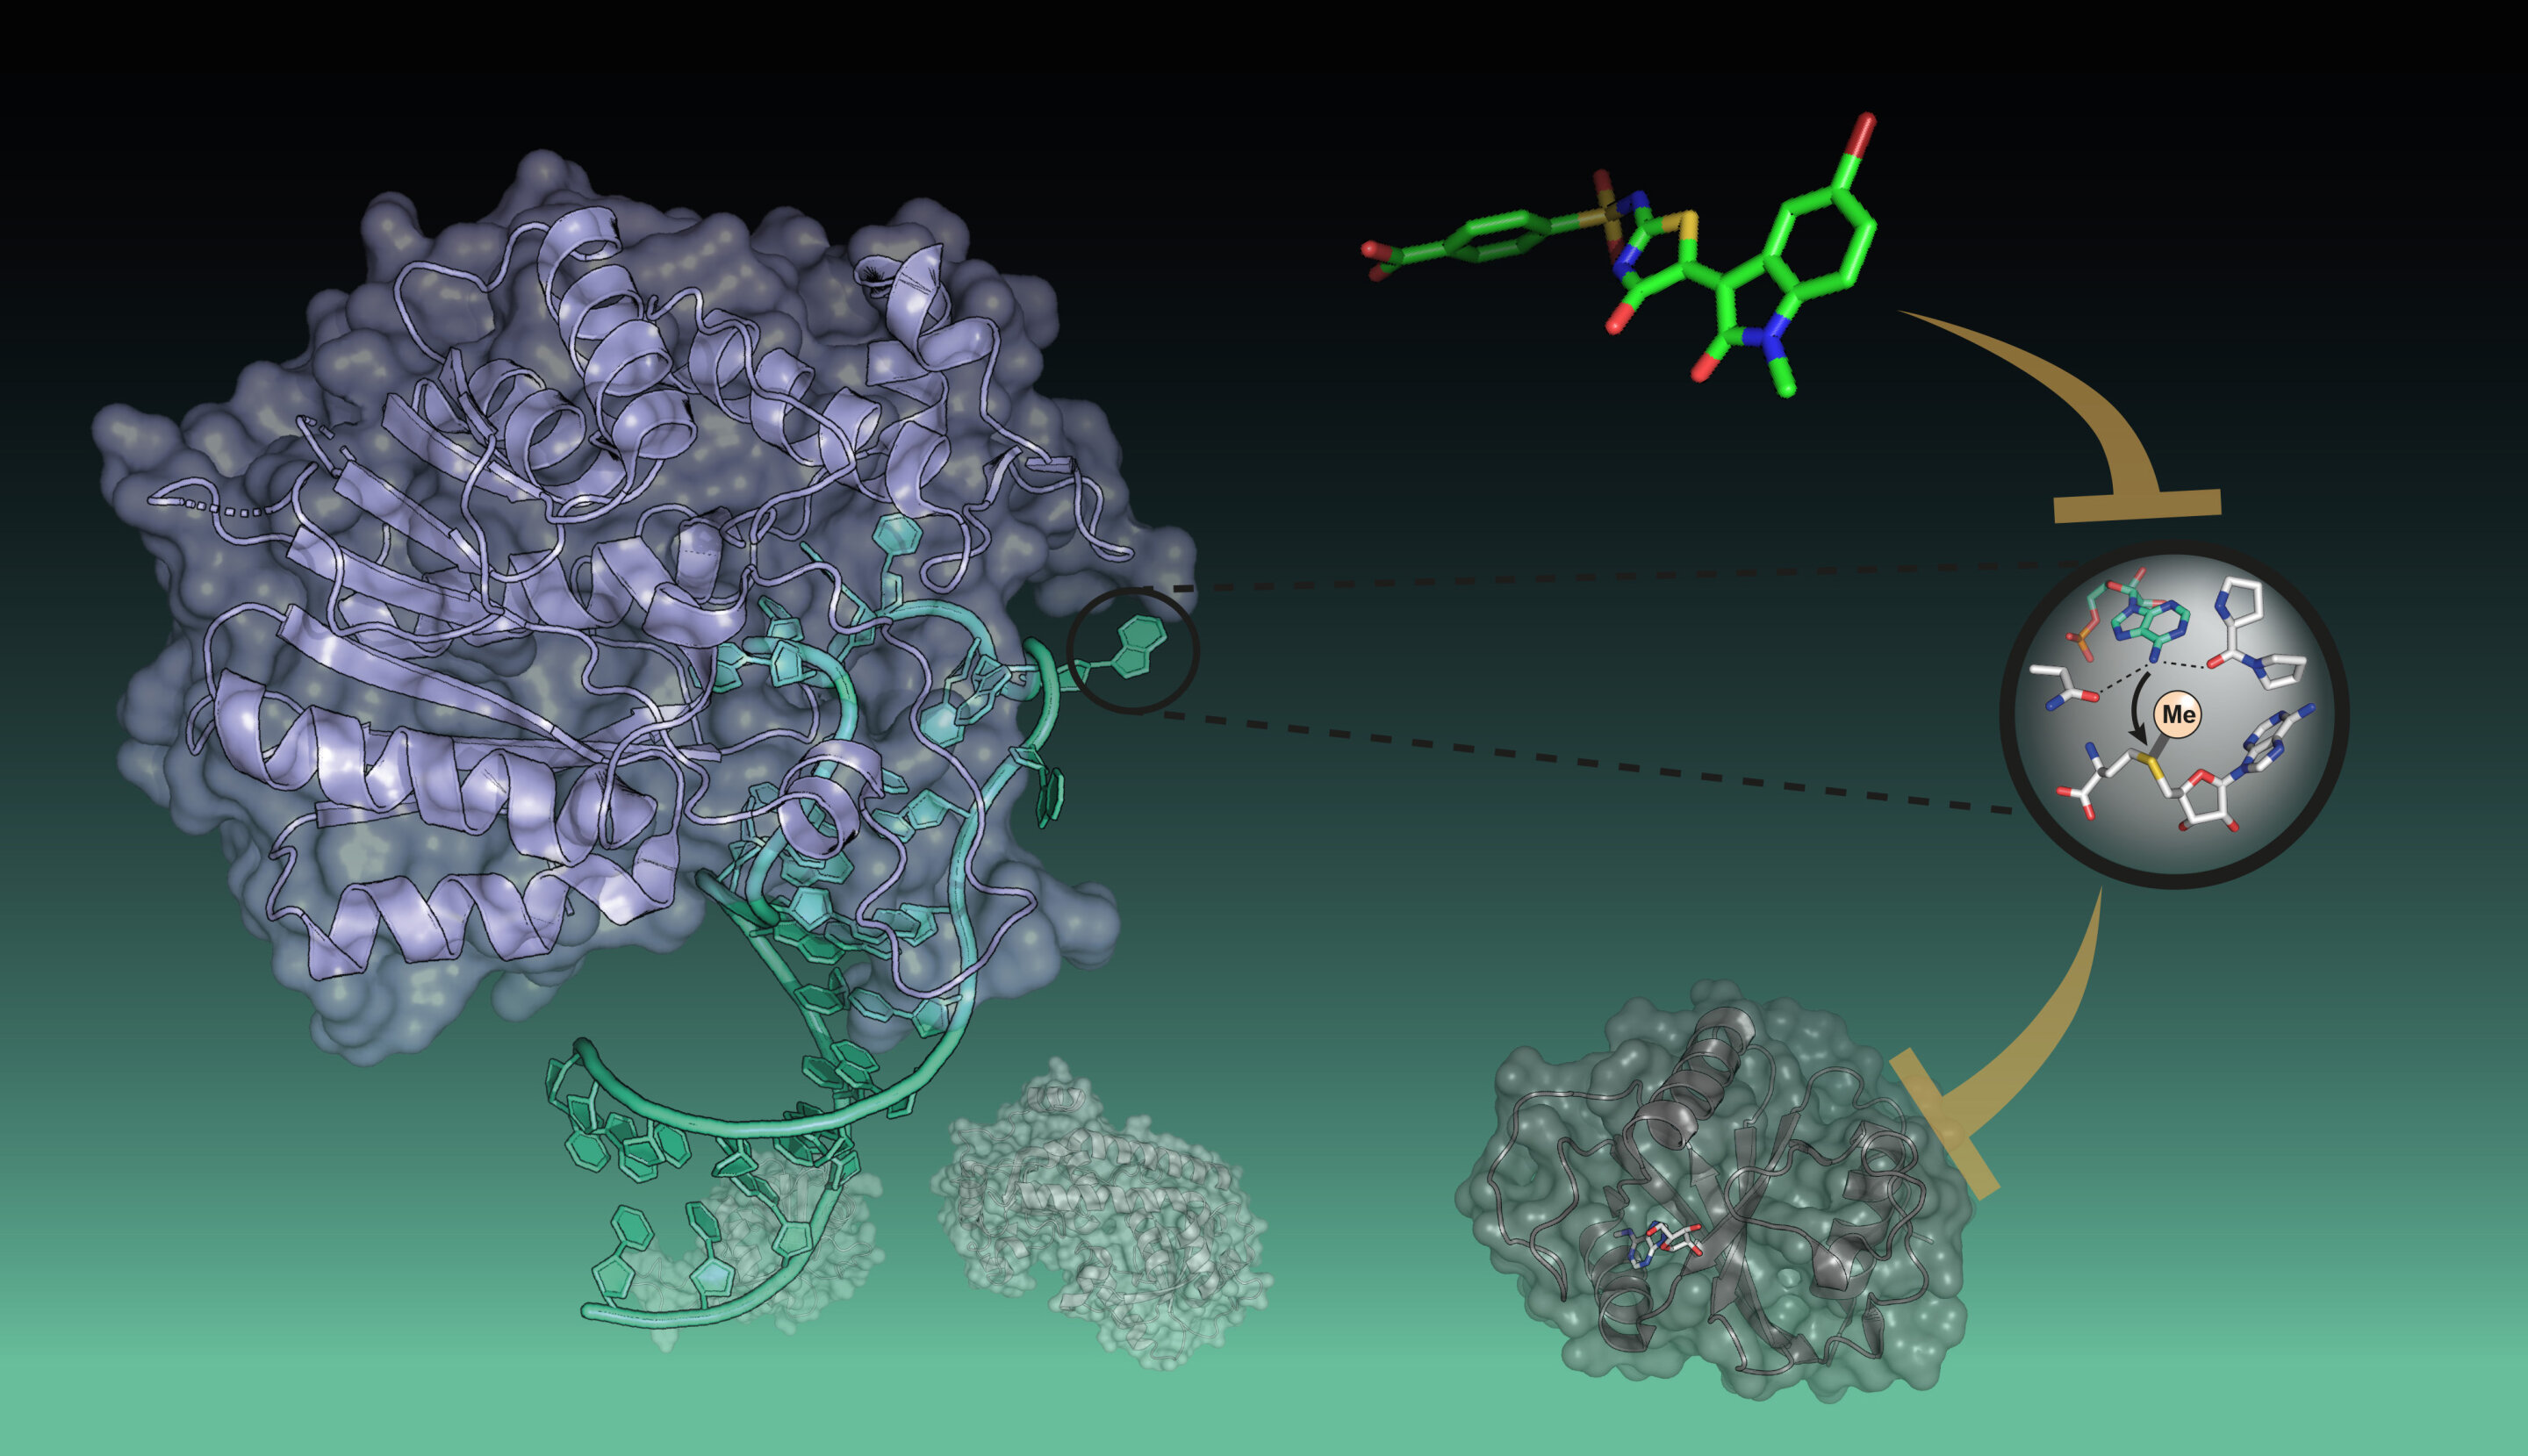 A promising target for new RNA therapeutics now accessible